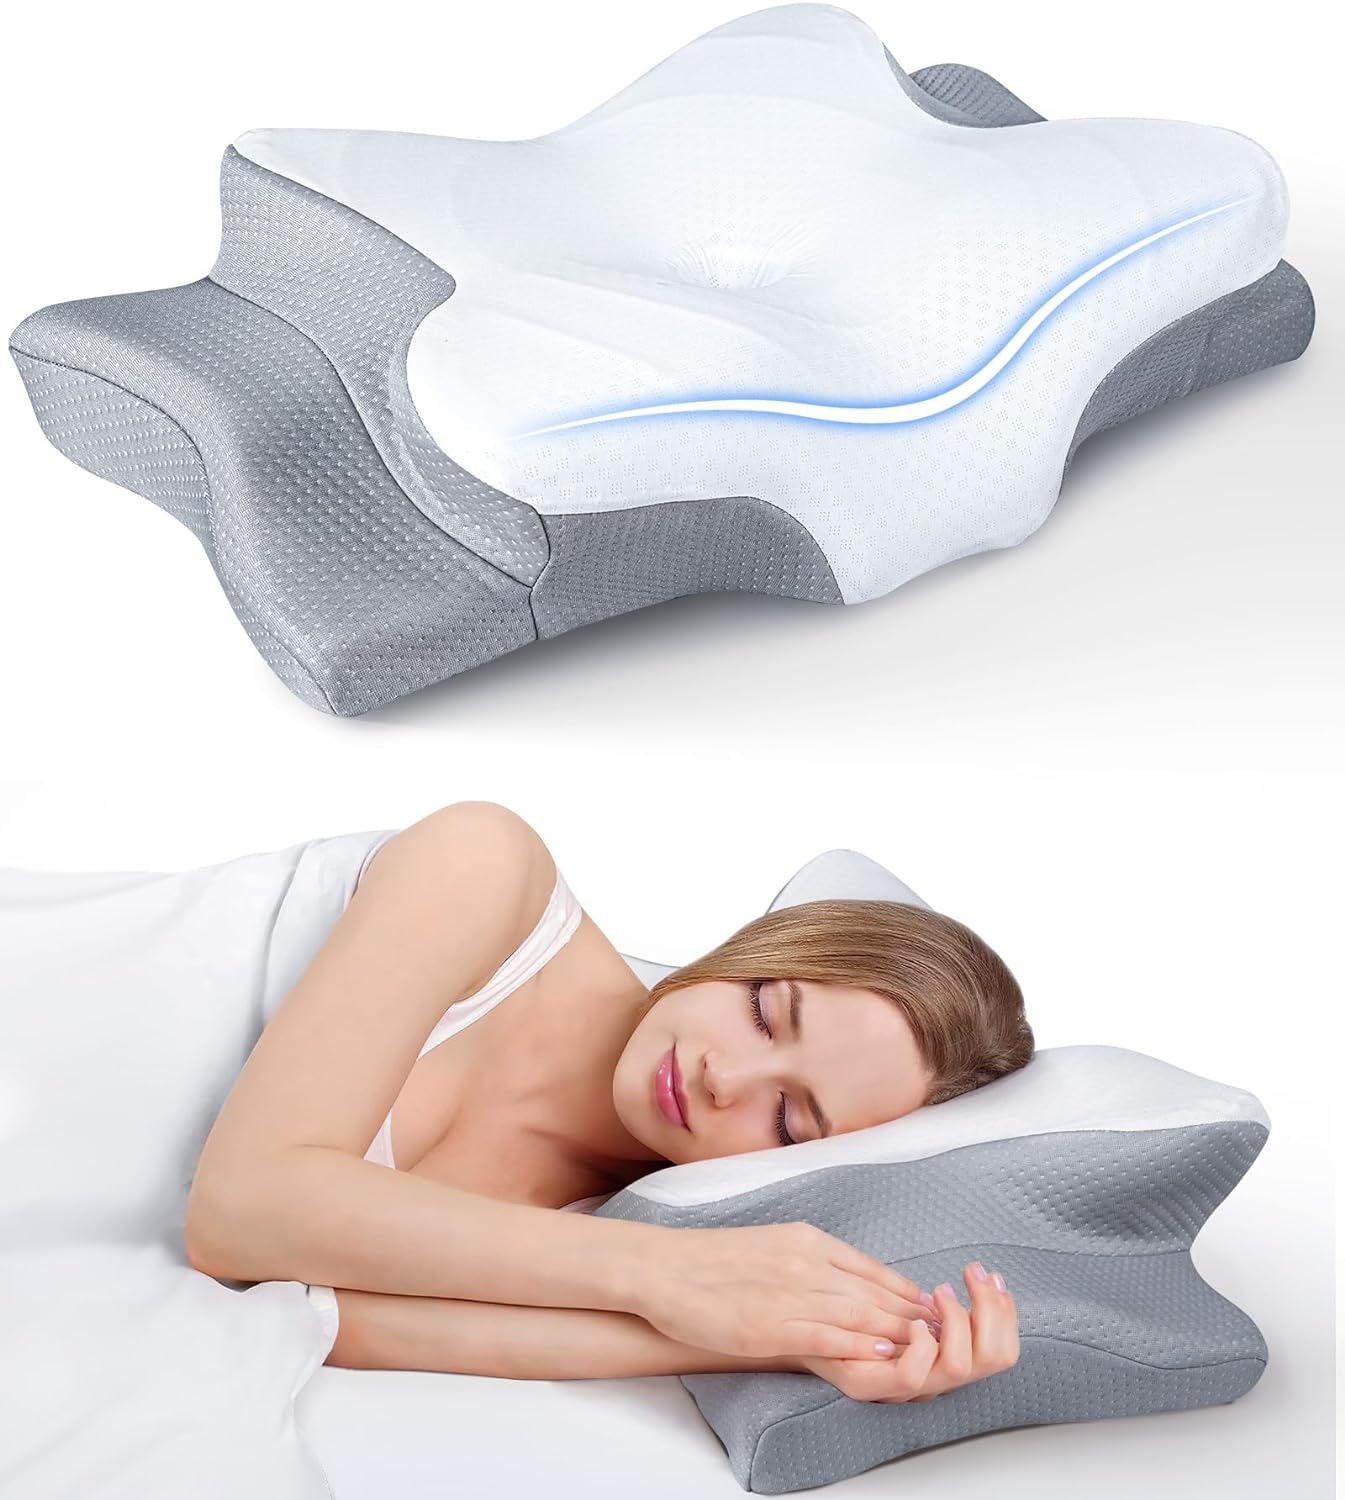 Orthopaedic Neck Support Pillow